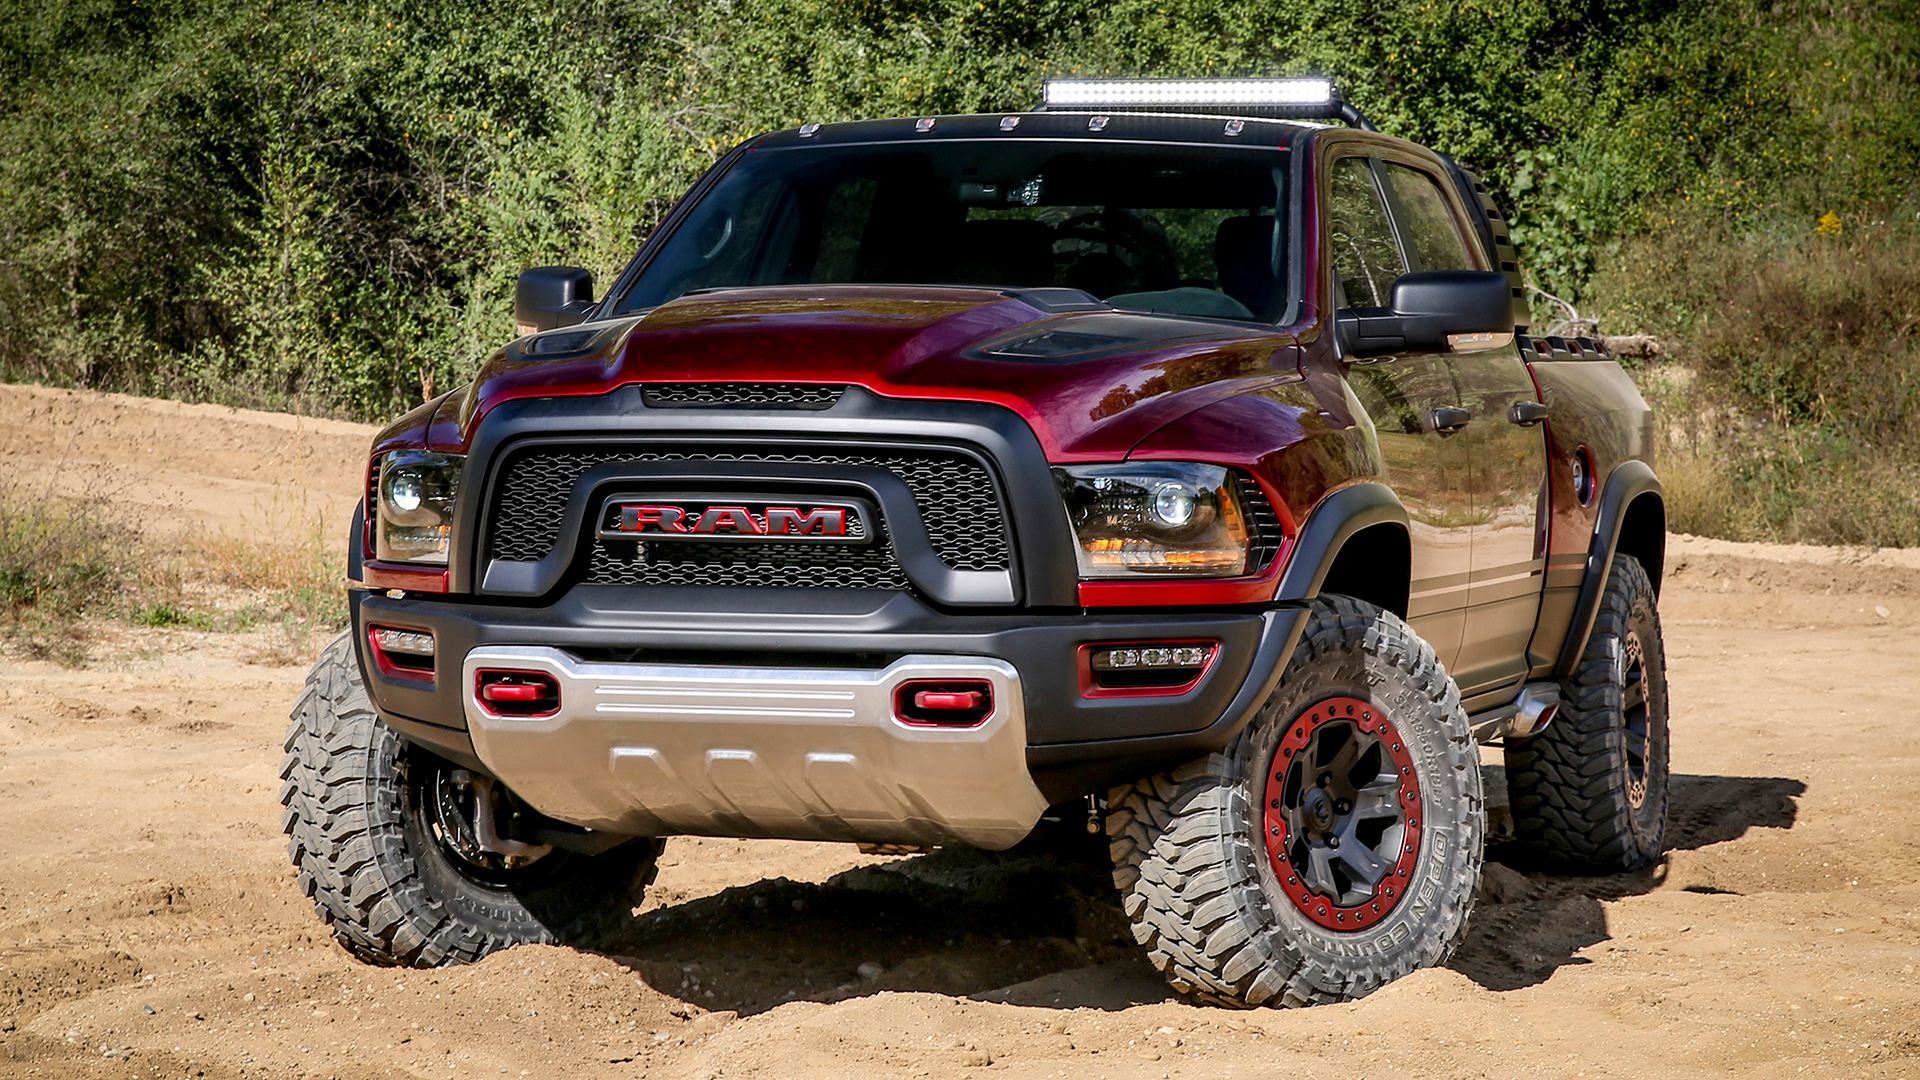 The Ram Rebel TRX Concept Truck Is a 575HP HellcatPowered Monster